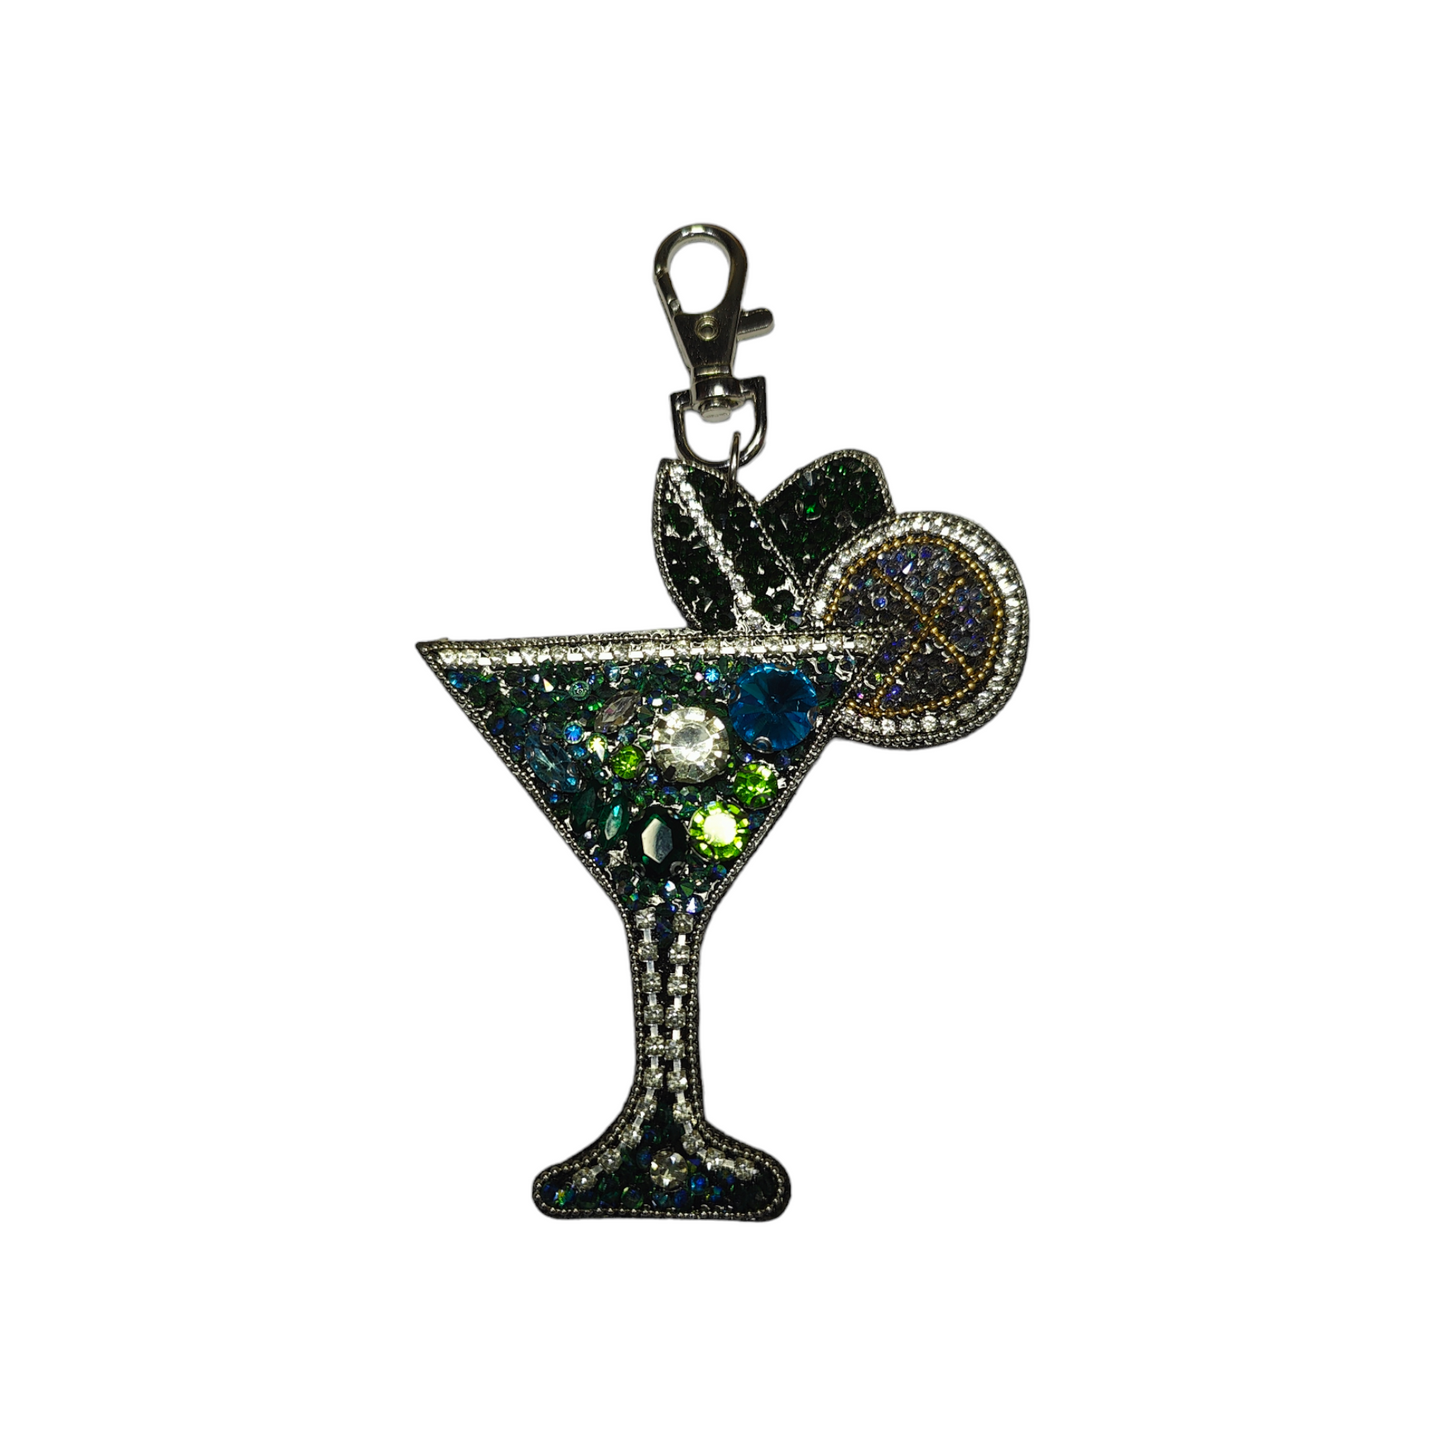 A champagne bag charm that will elevate the look of your bag. 